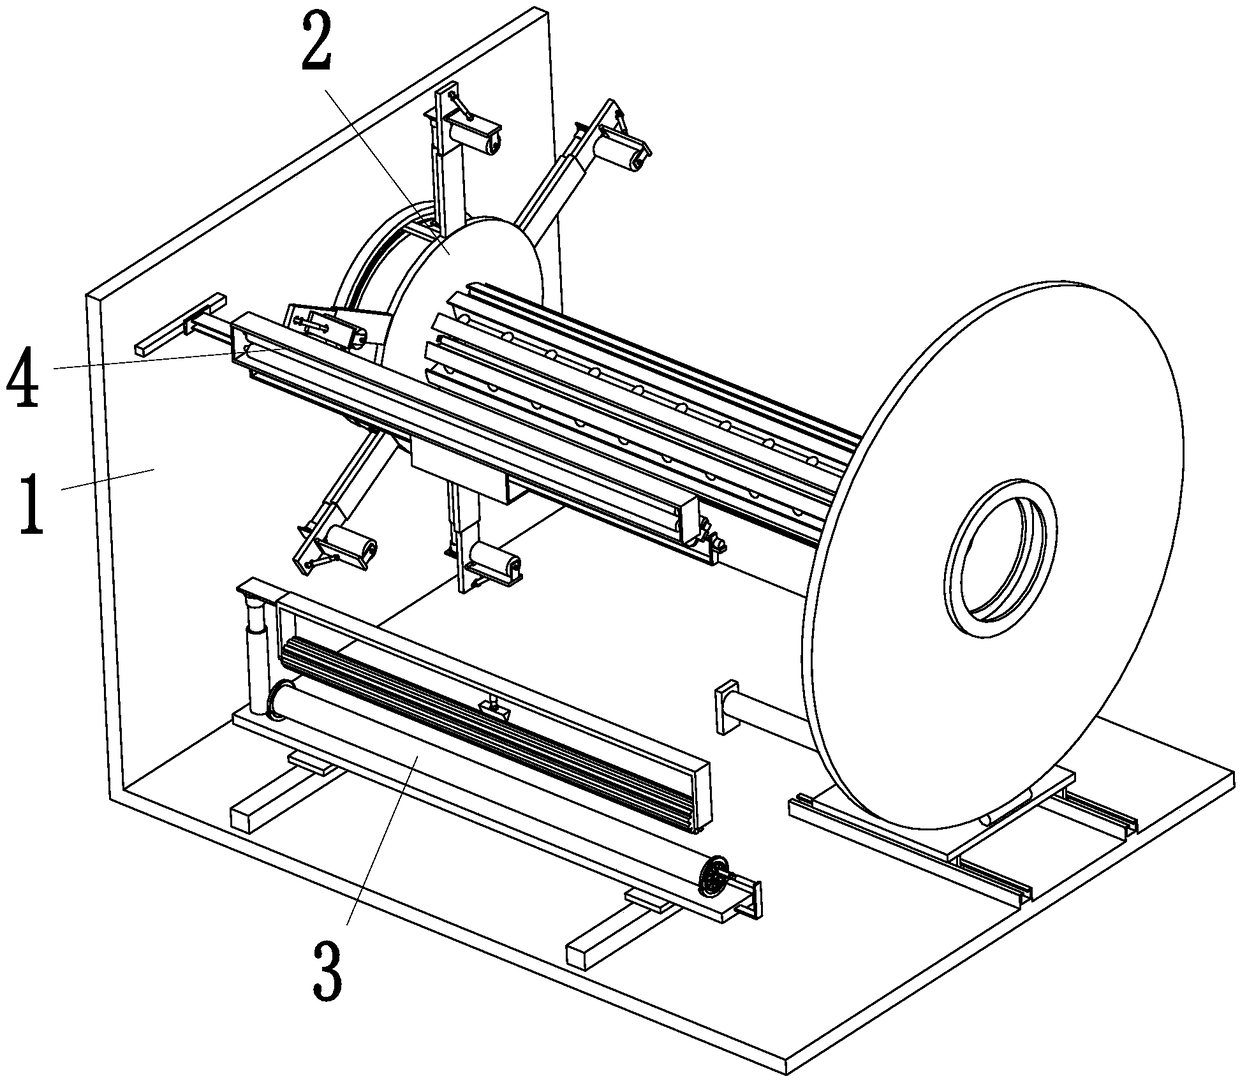 Corrugated-paper processing system